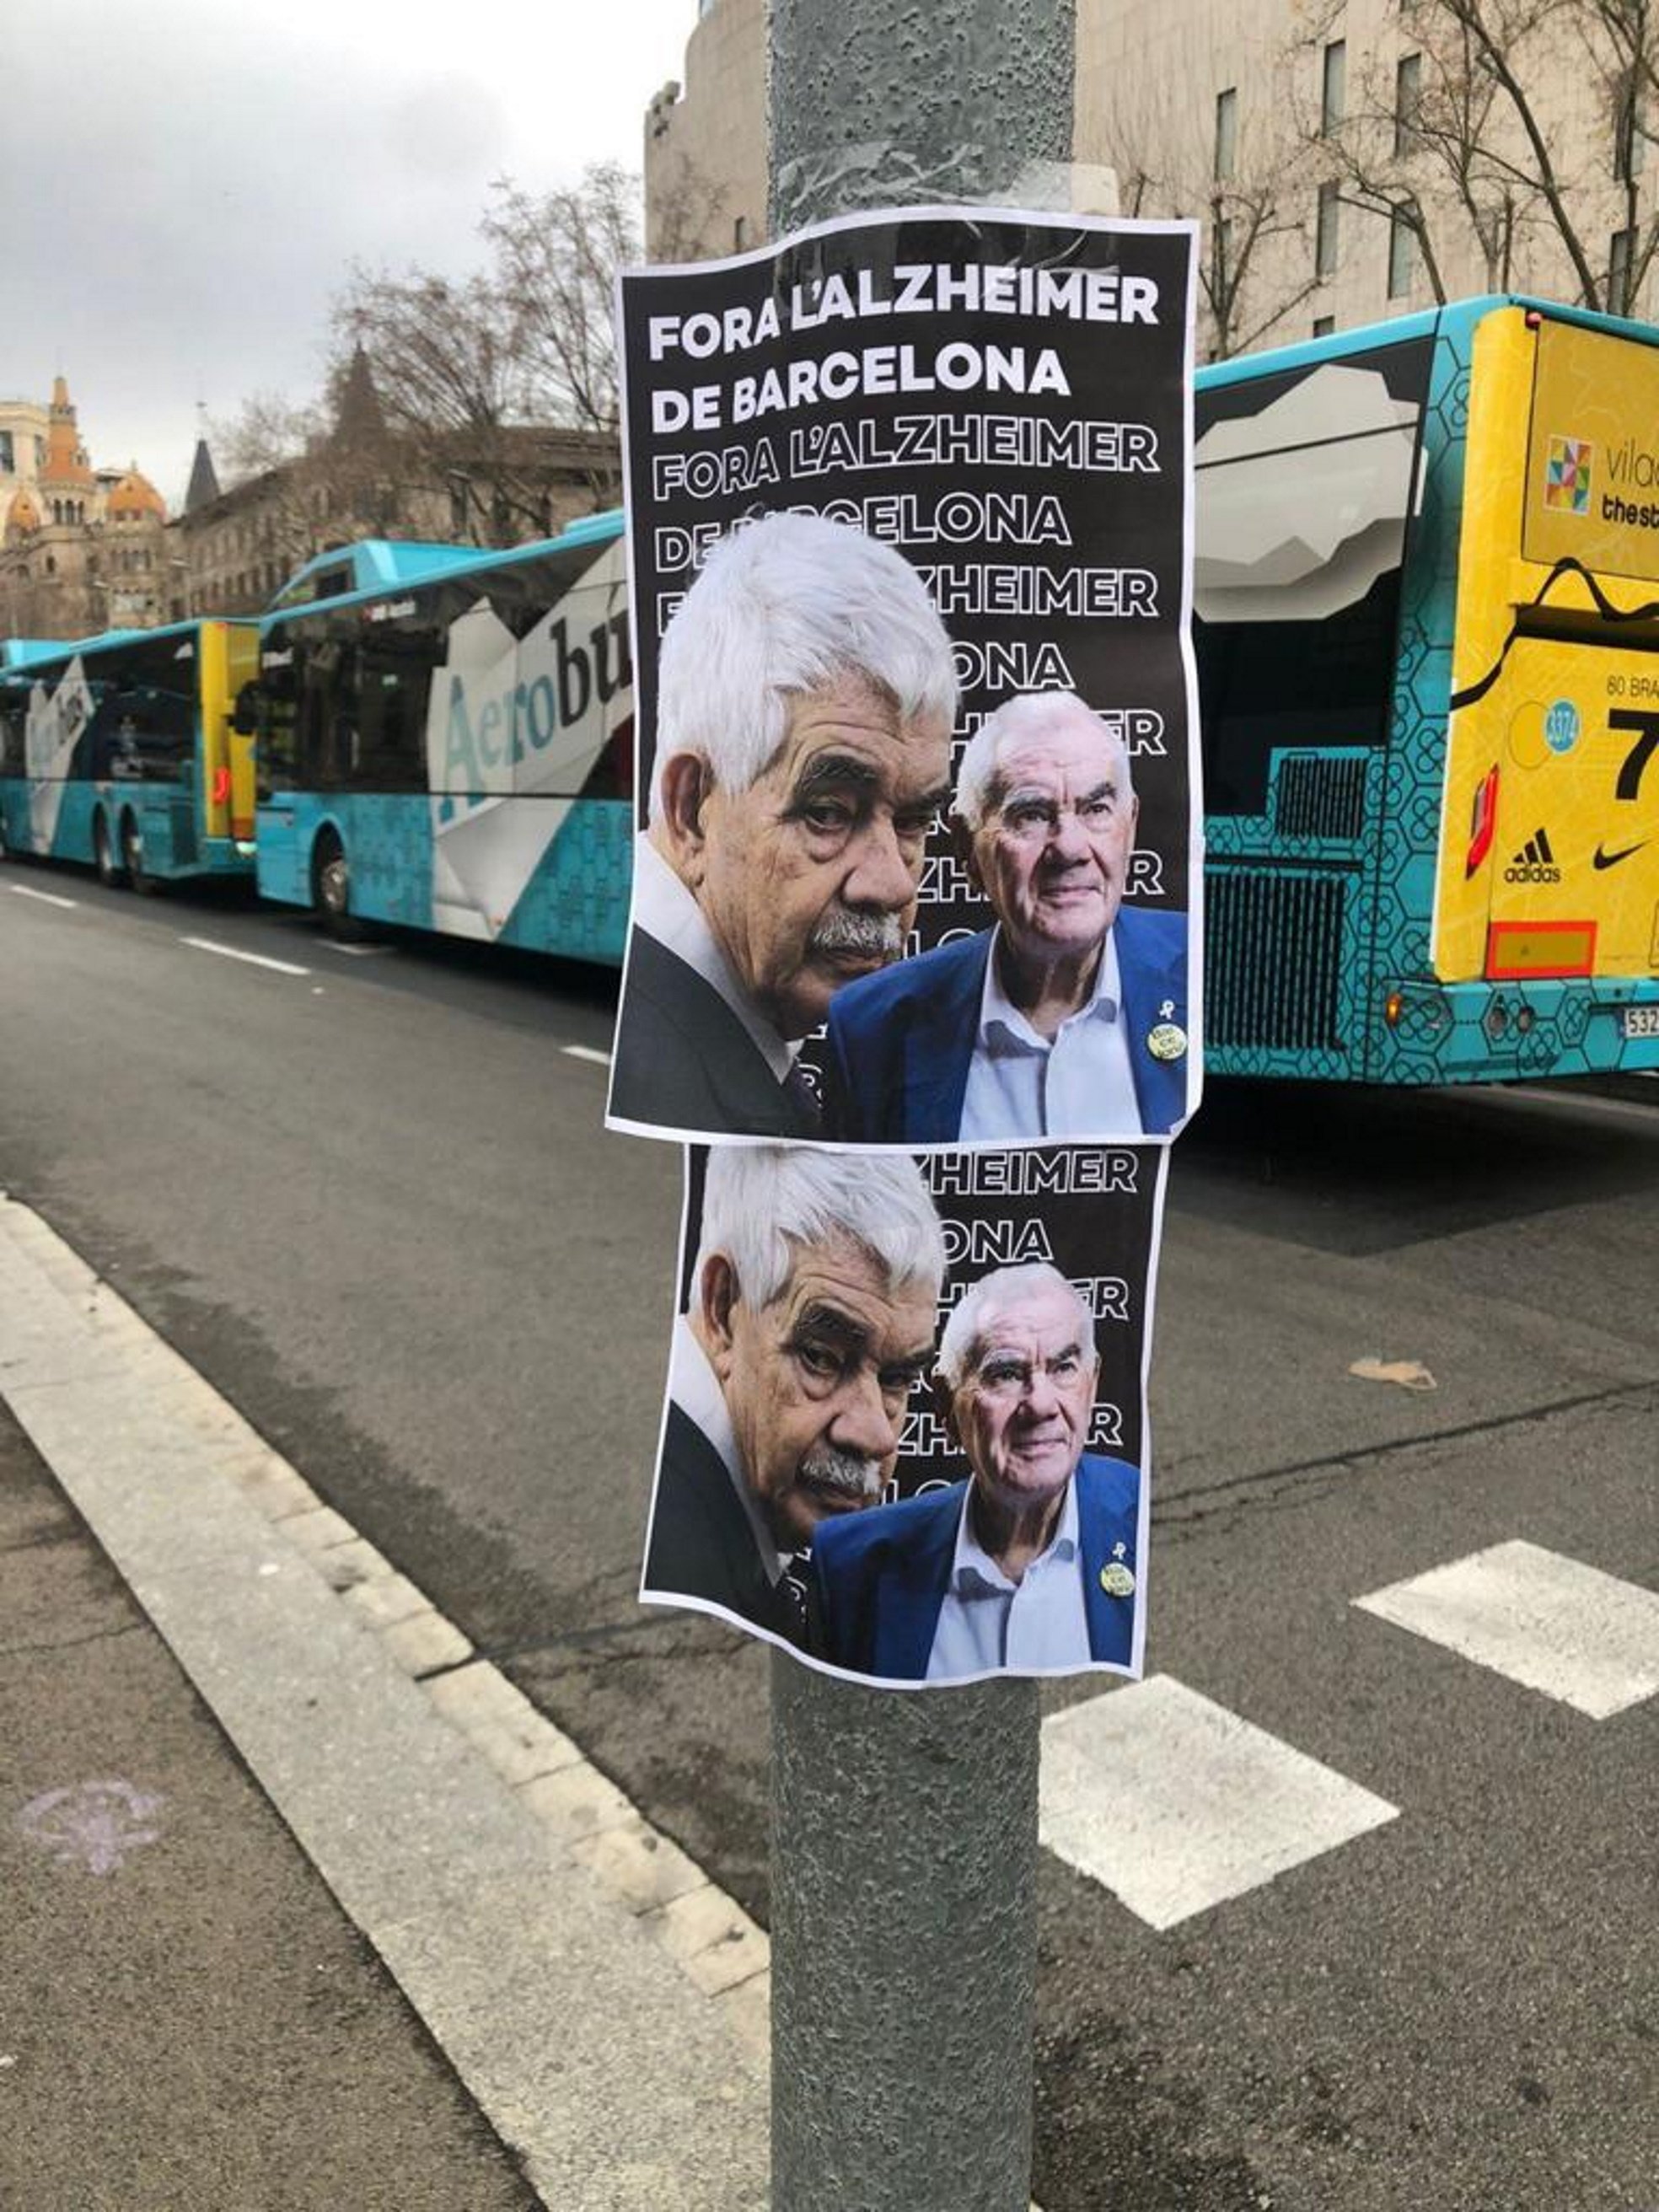 Mossos investigate Barcelona poster campaign denigrating Alzheimer's and Maragall family